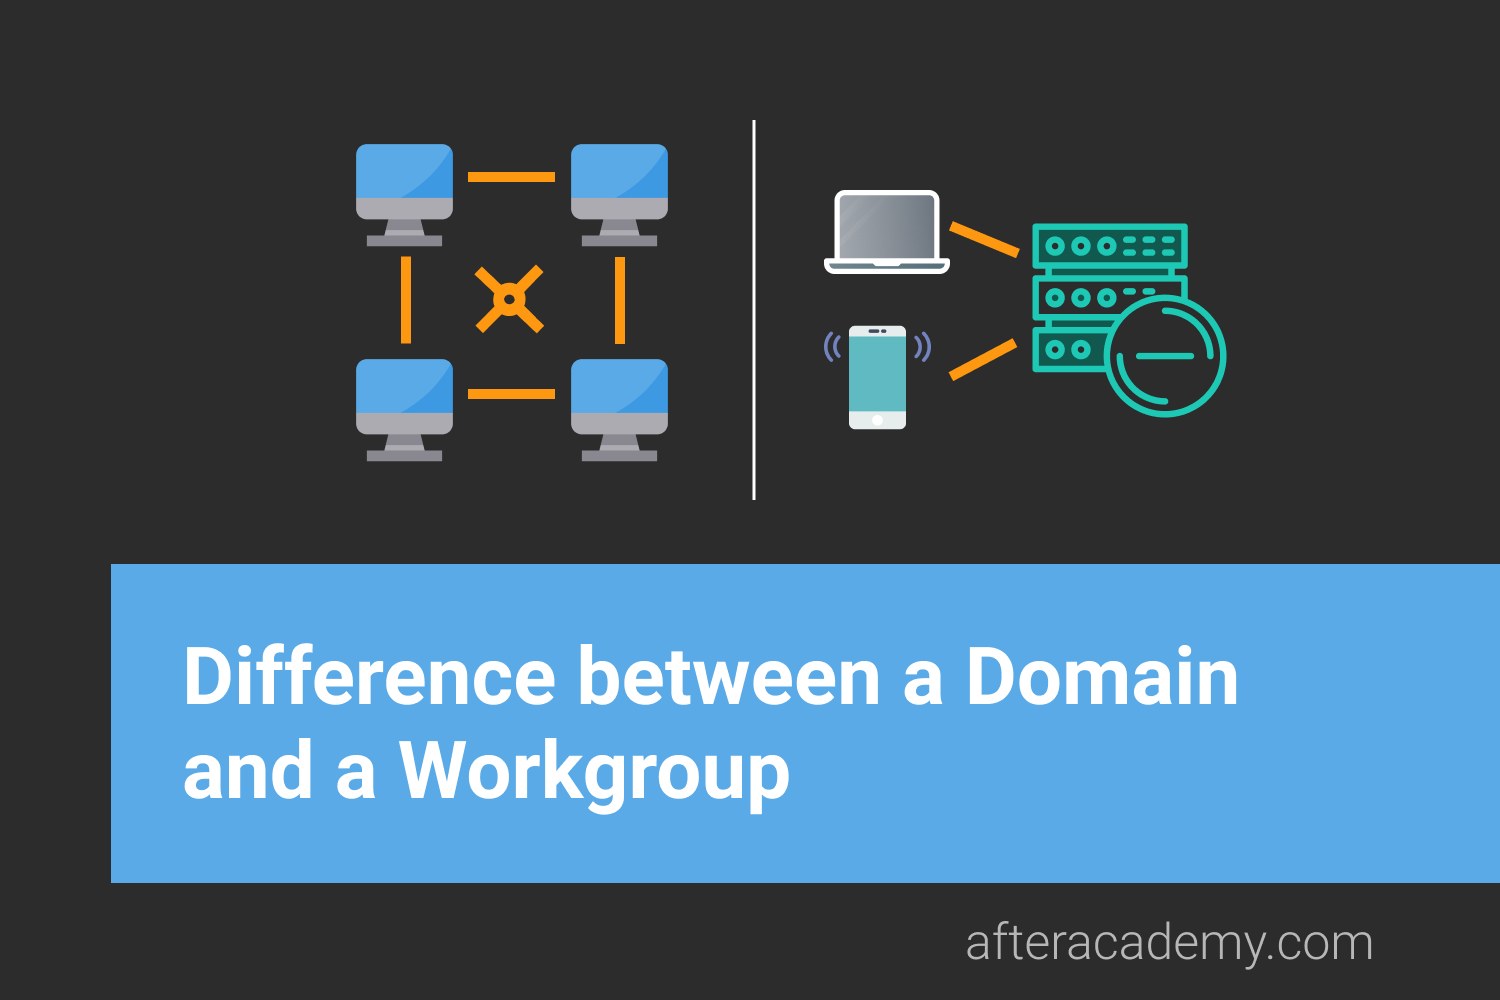 Difference between a Domain and a Workgroup